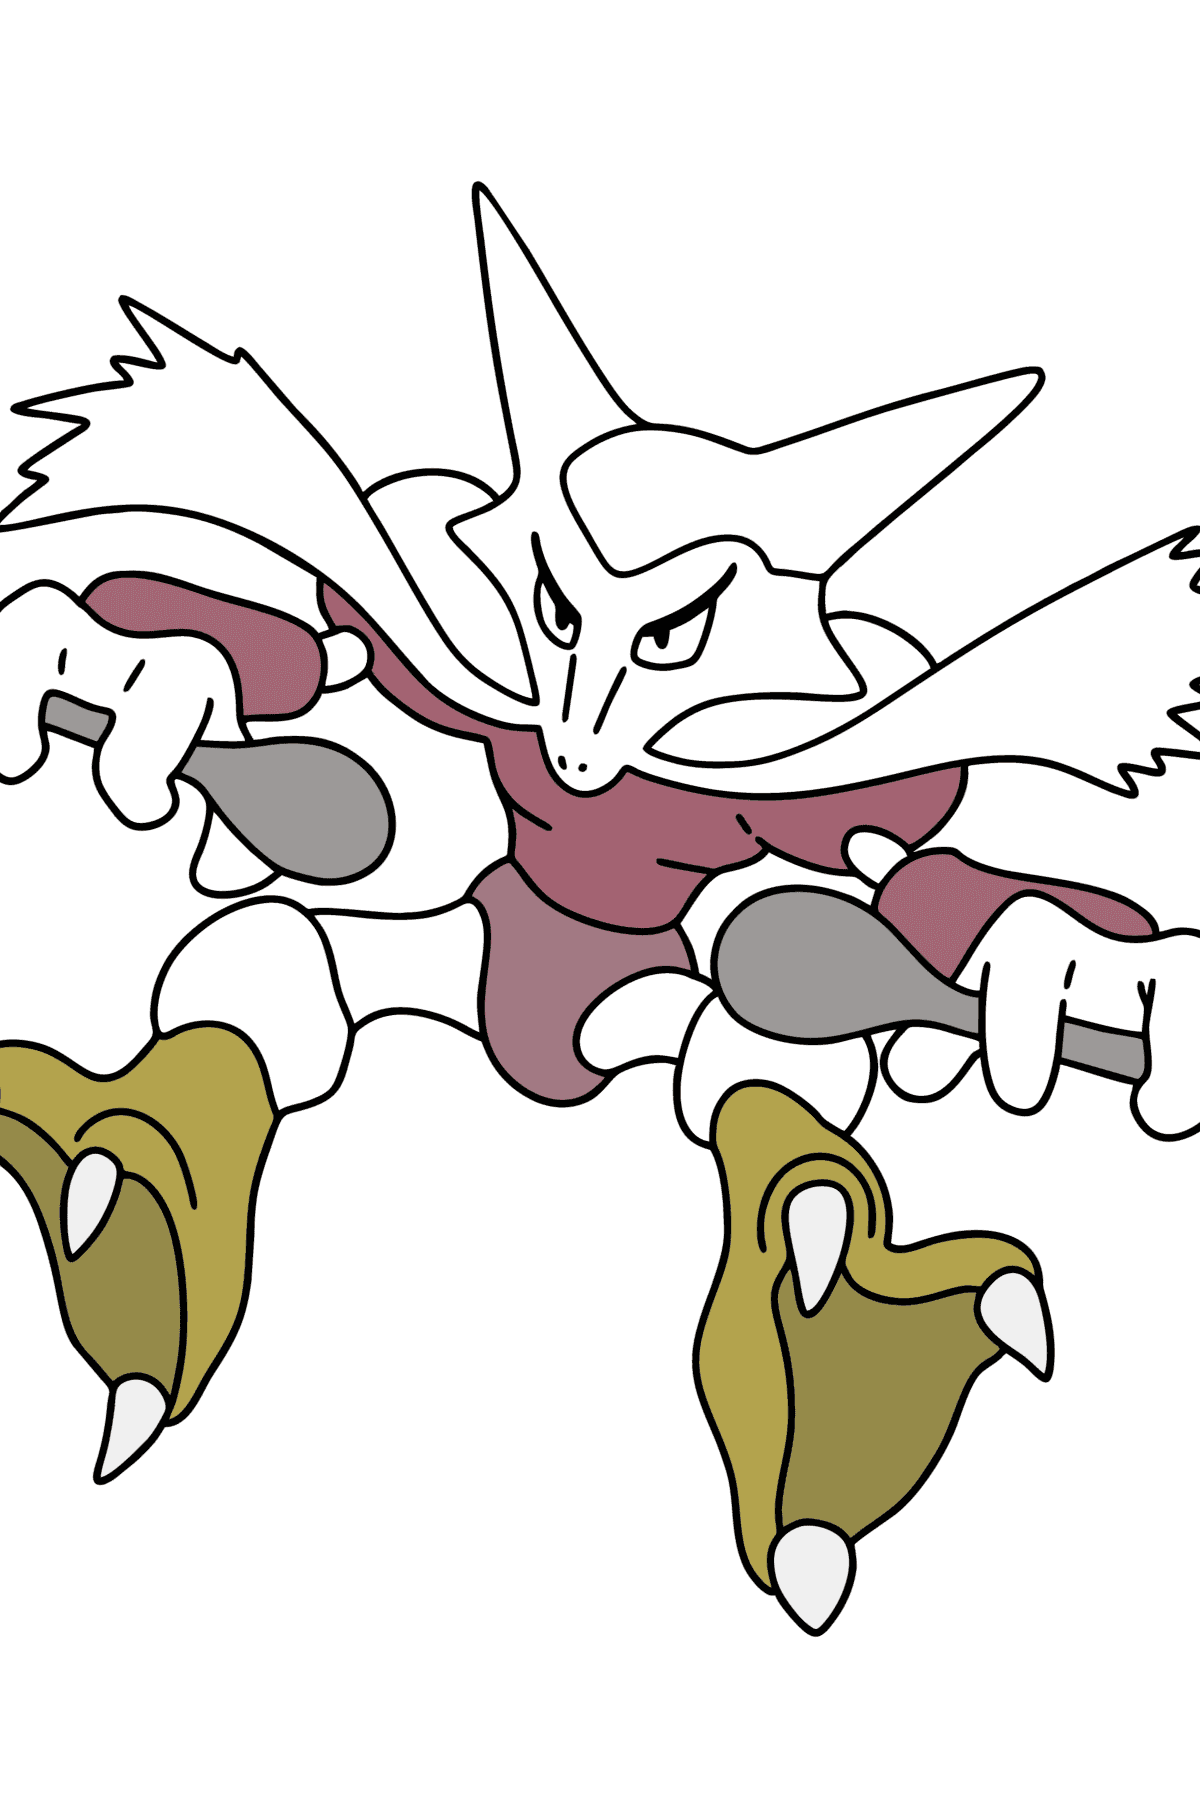 Coloring page Pokemon Go Alakazam - Coloring Pages for Kids